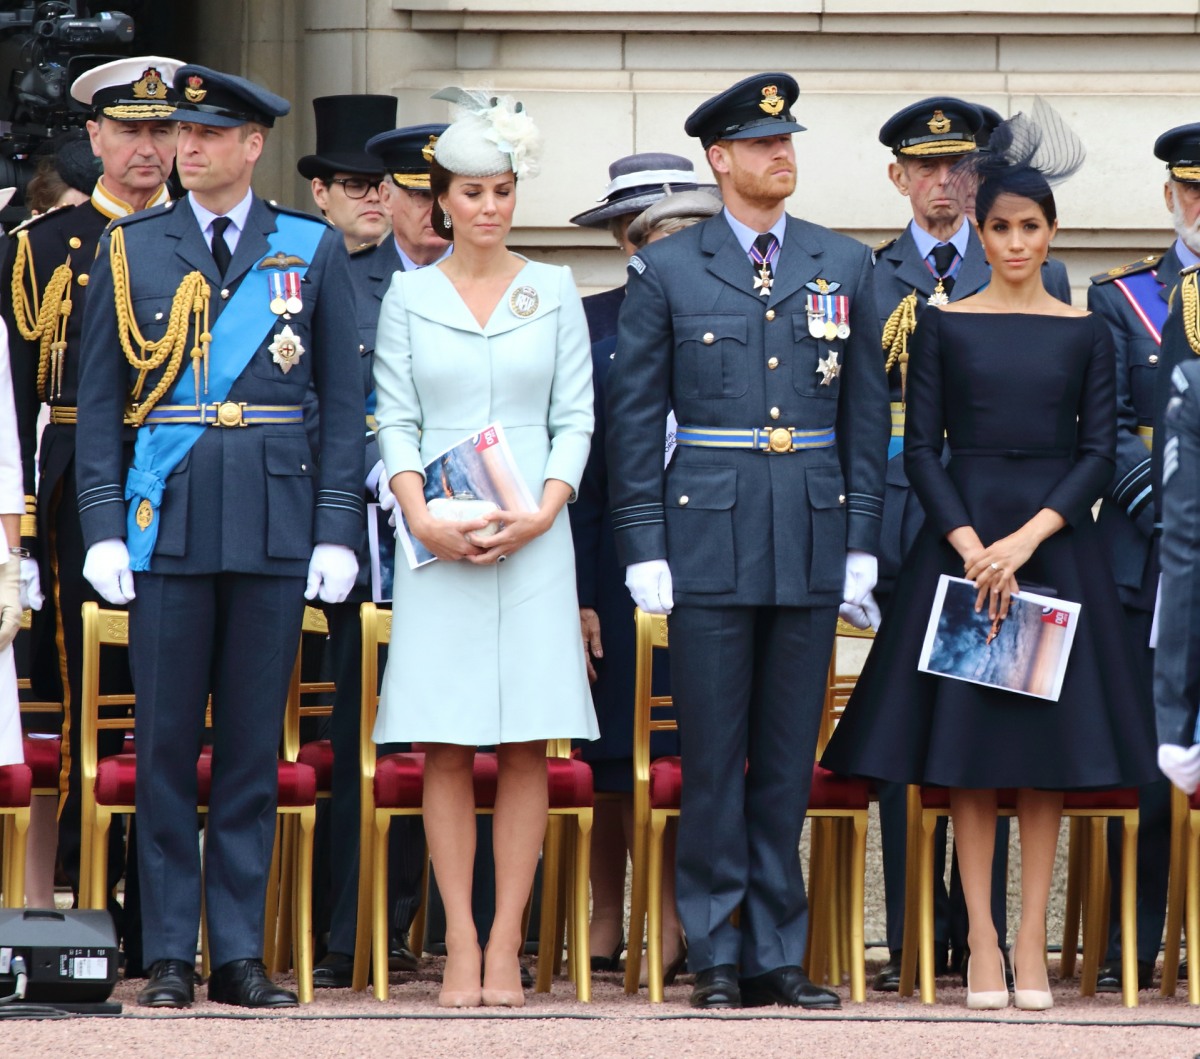 Prince William, Catherine Duchess of Cambridge, Prince Harry and Meghan Duchess of Sussex at the 100th Anniversary of the Royal Air Force, Buckingham Palace, London, UK on Tuesday 10th July 2018